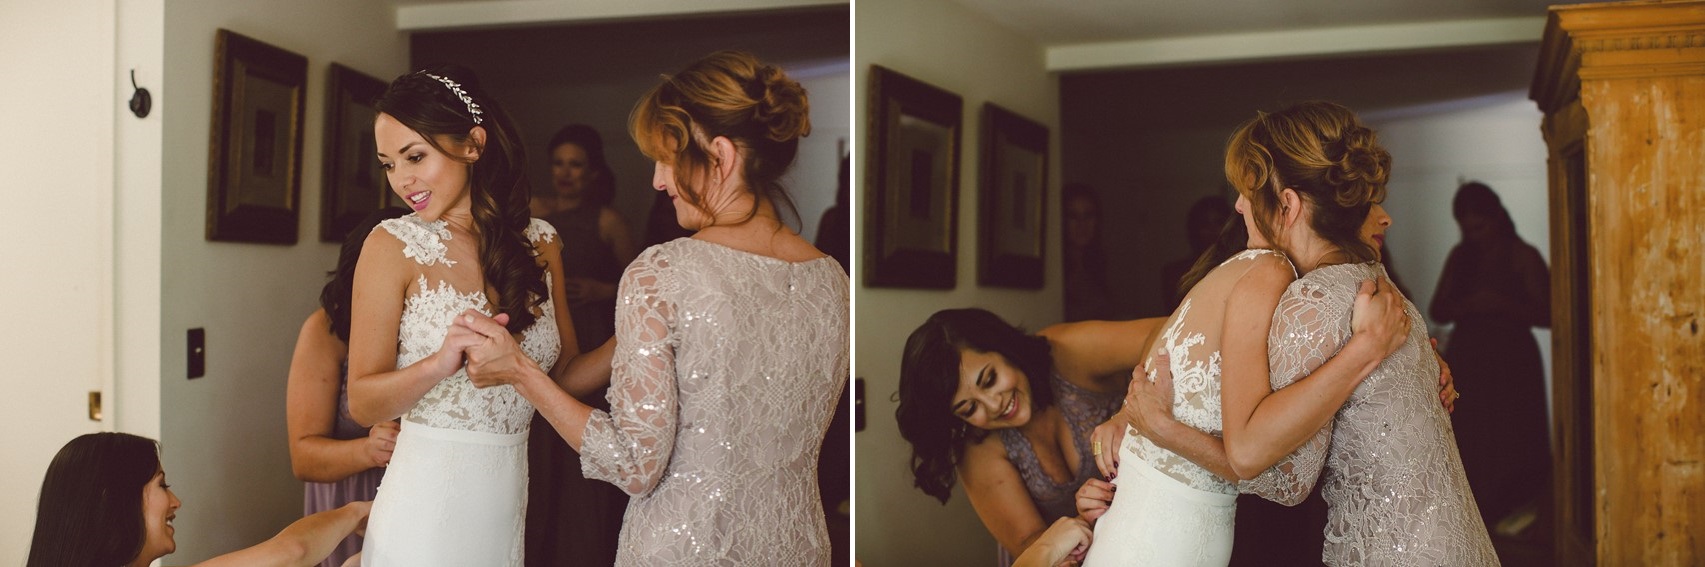 Bride & Mother Getting Ready